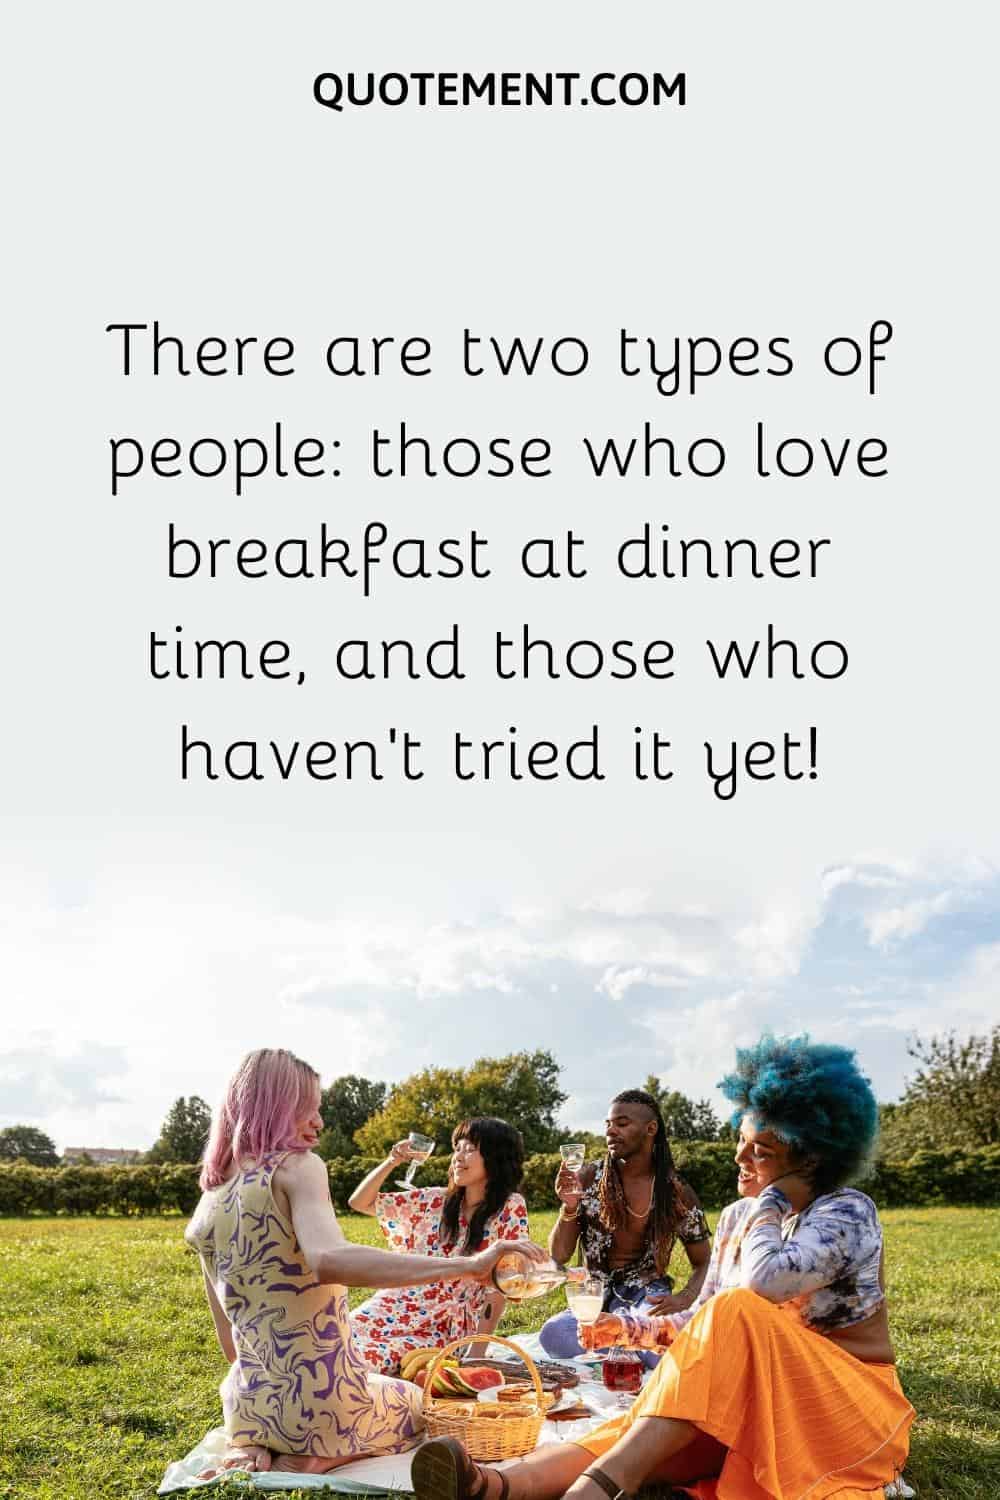 There are two types of people those who love breakfast at dinner time, and those who haven't tried it yet!